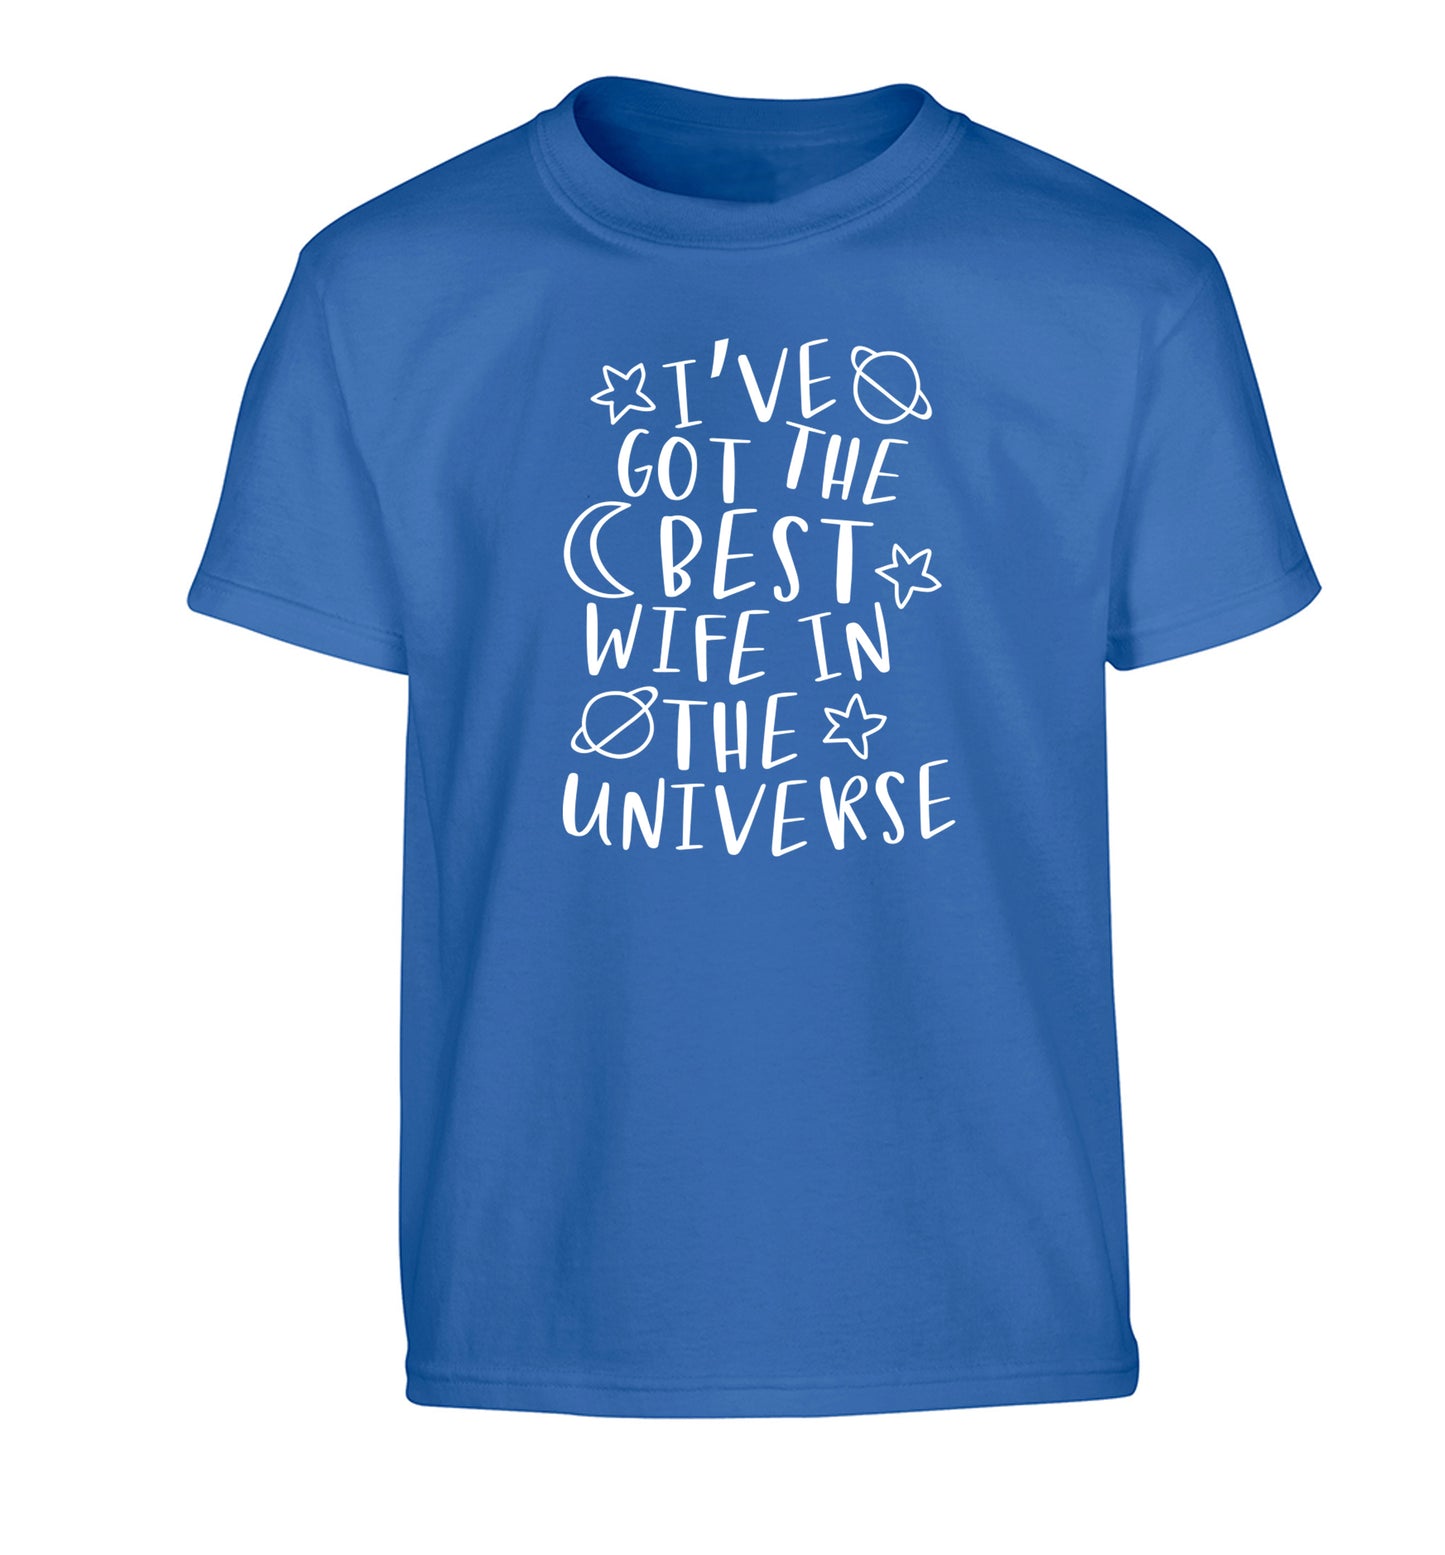 I've got the best wife in the universe Children's blue Tshirt 12-13 Years